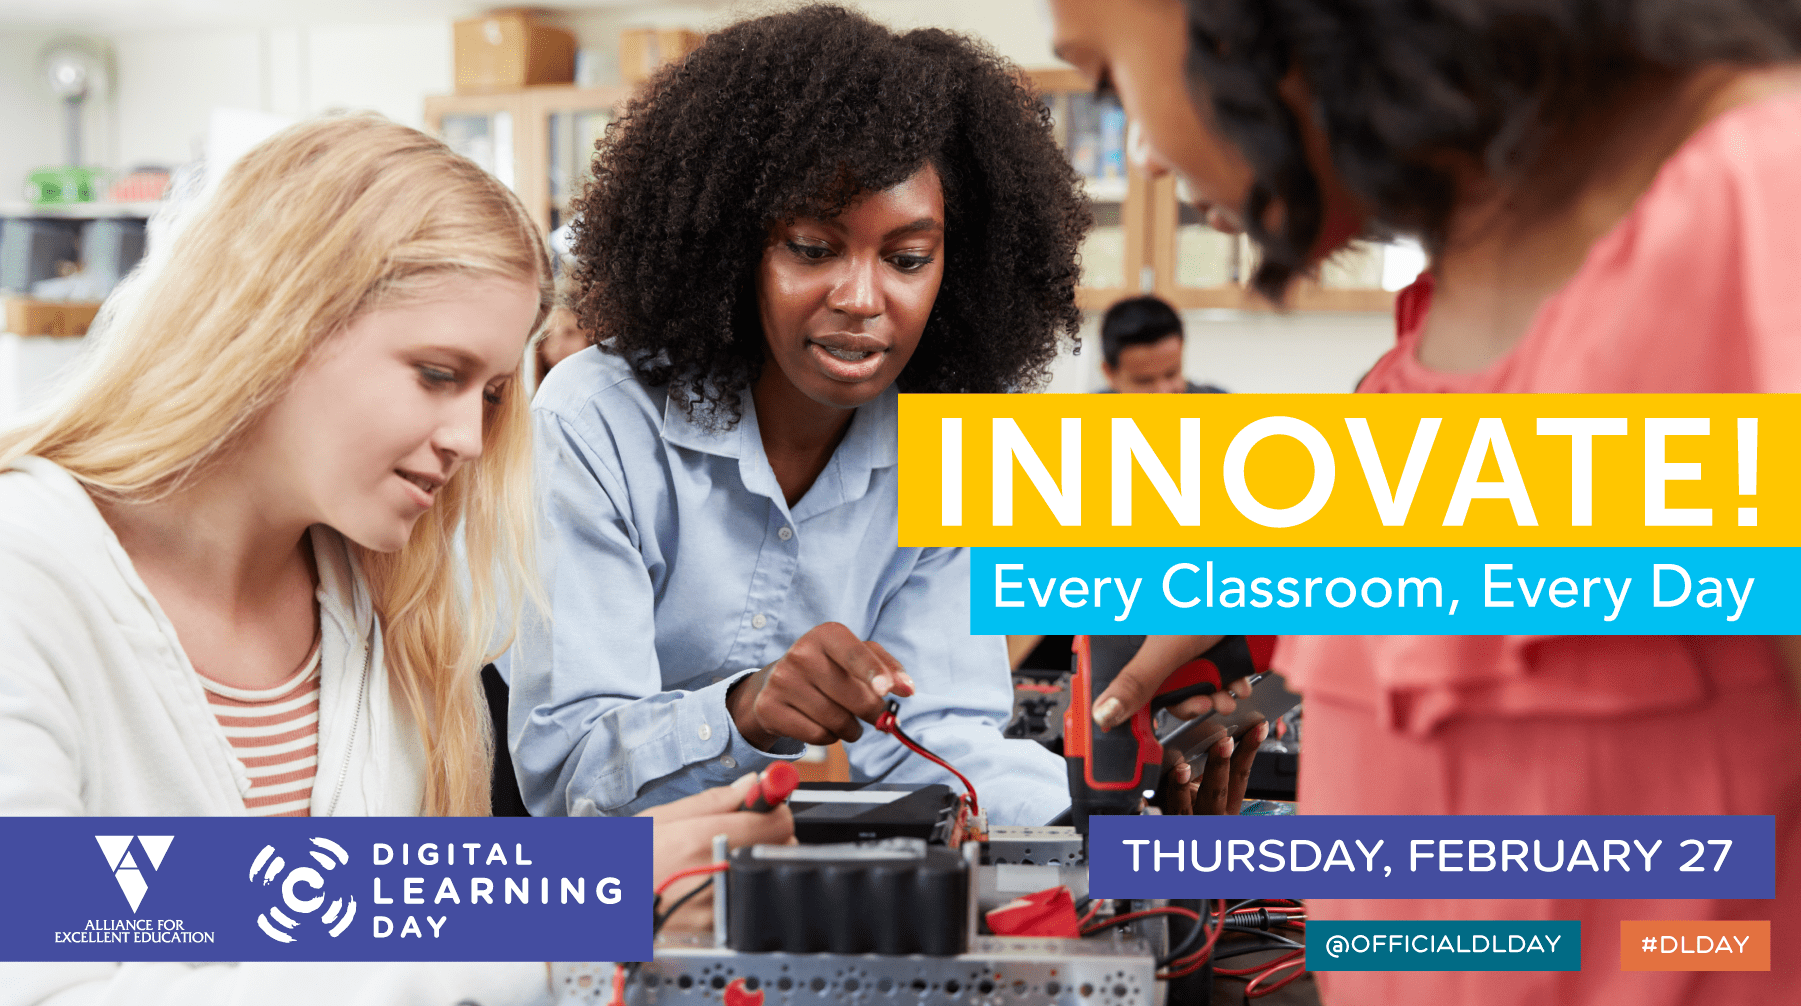 Digital Learning Day banner. Innovate! Every Classroom, Every Day